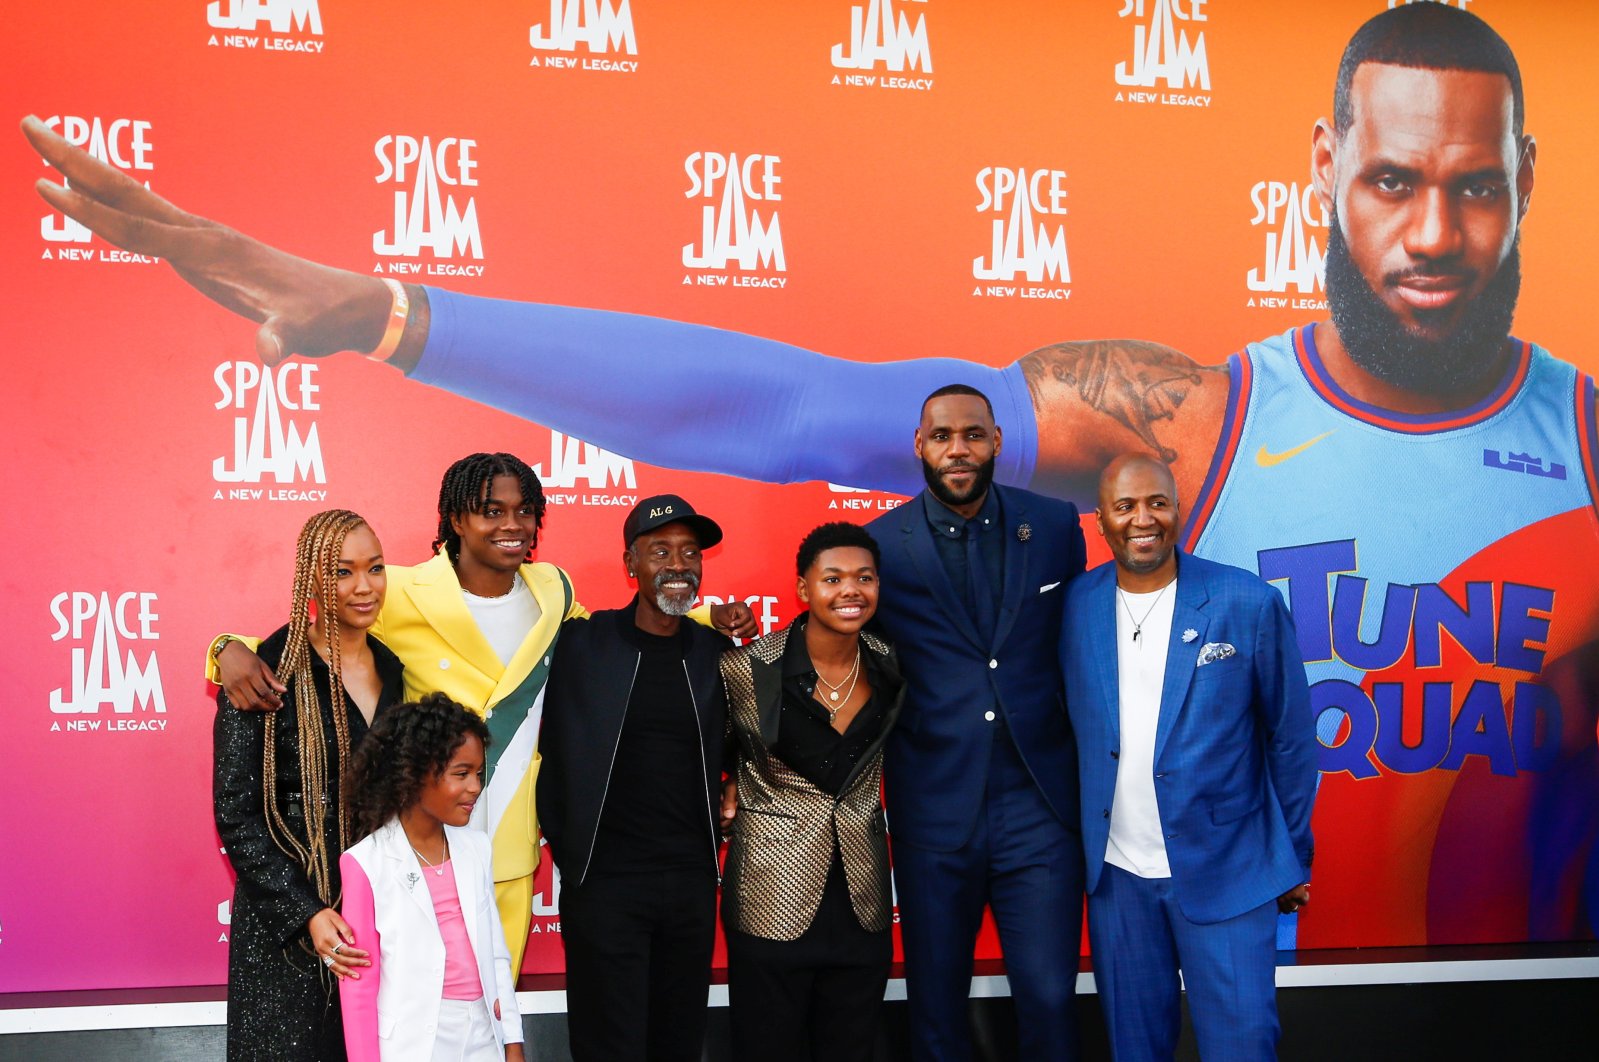 Cast members LeBron James, Don Cheadle, Cedric Joe, Sonequa Martin-Green, Ceyair Wright, Harper Alexander and Malcolm D. Lee pose as they attend the premiere for the film "Space Jam: A New Legacy" in Los Angeles, California, U.S., July 12, 2021. (Reuters Photo)